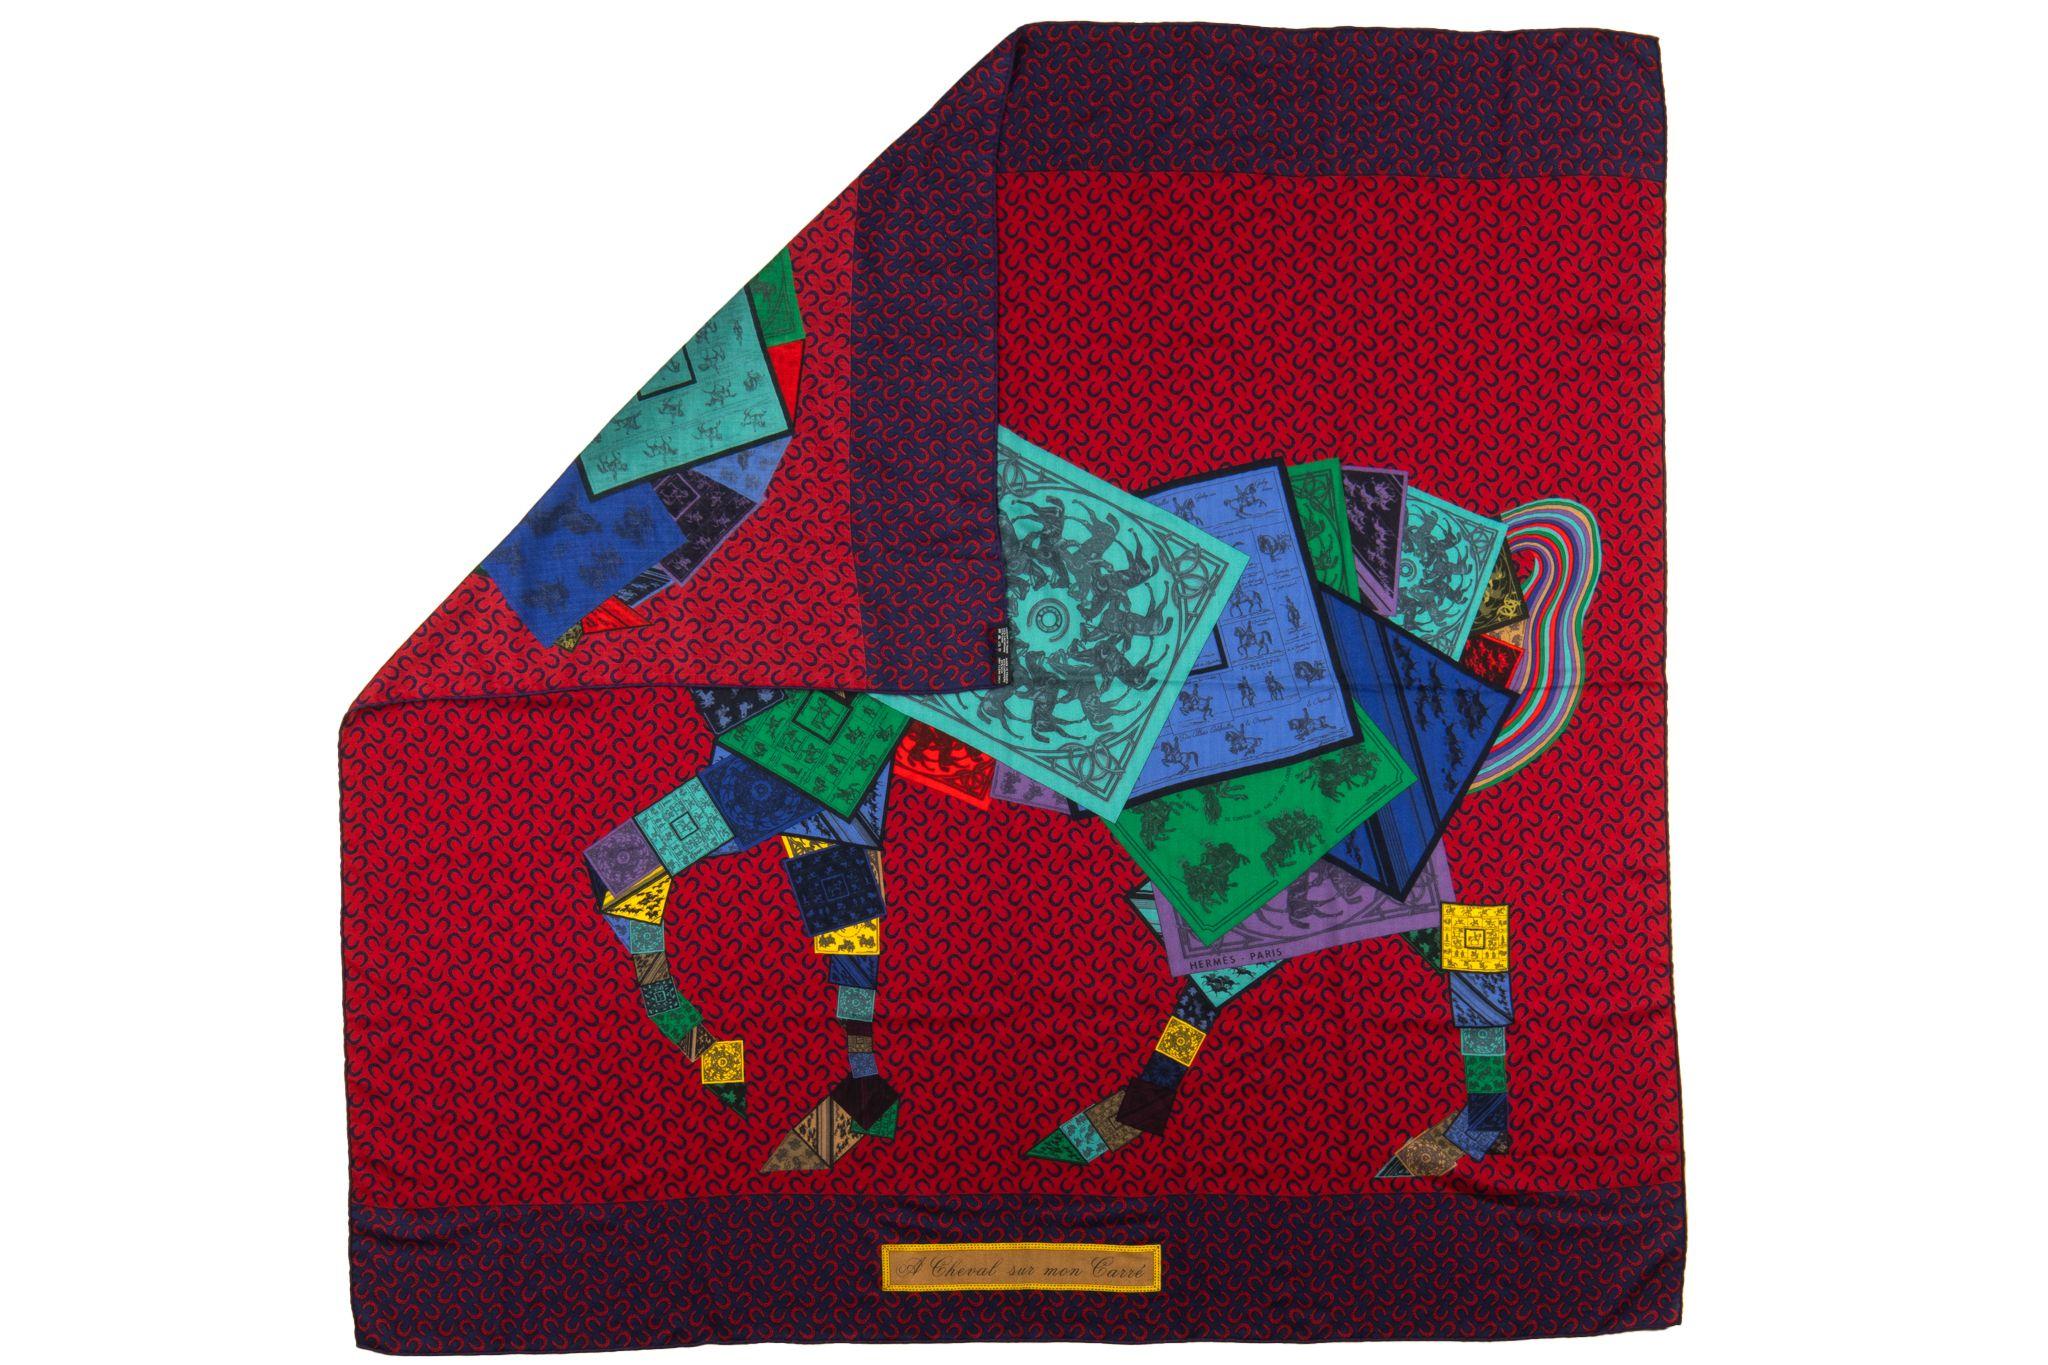 The Hermes Cheval Sur Mon Carre Cashmere/Silk Shawl in multi color and featuring rolled edges, perfect for layering. Comes without box.